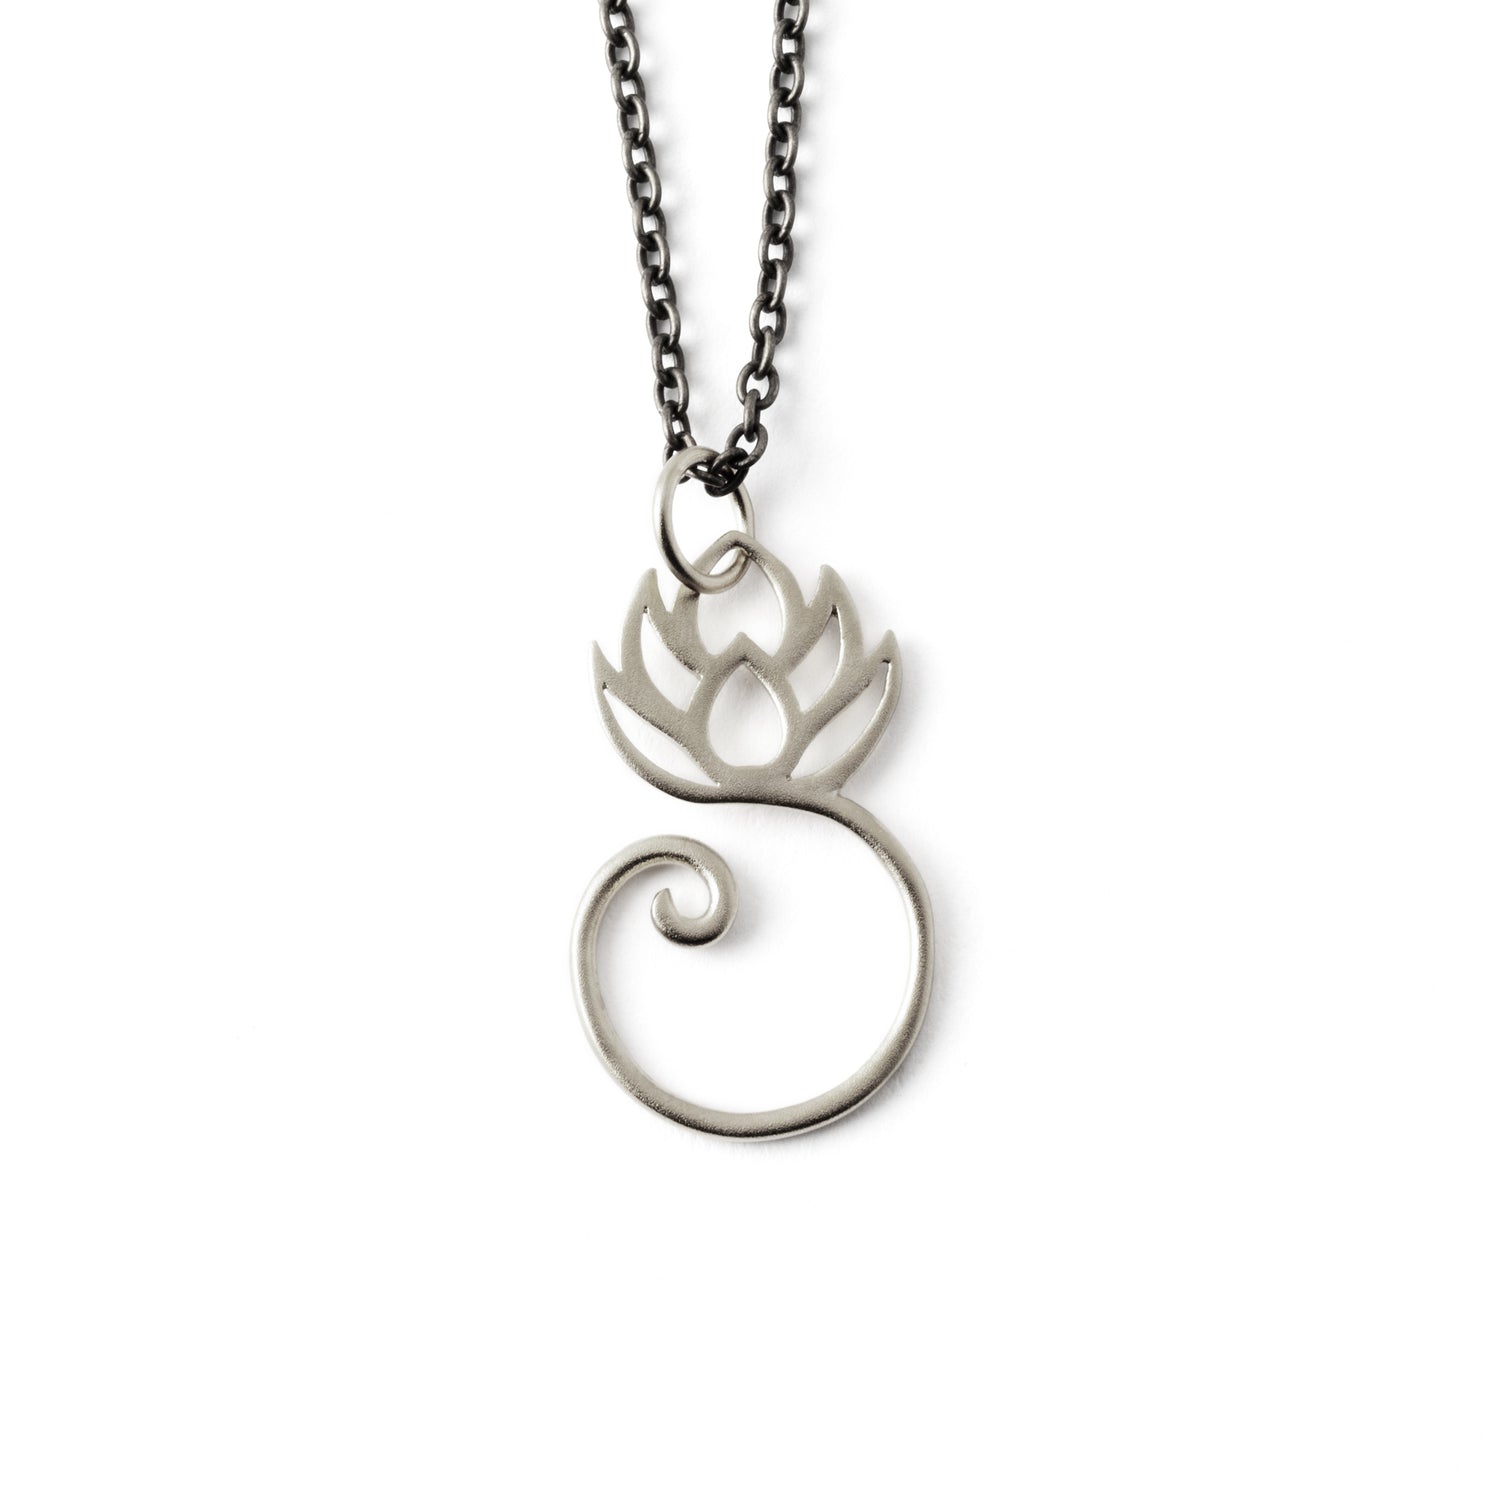 Spiralling Silver Lotus Charm necklace frontal view